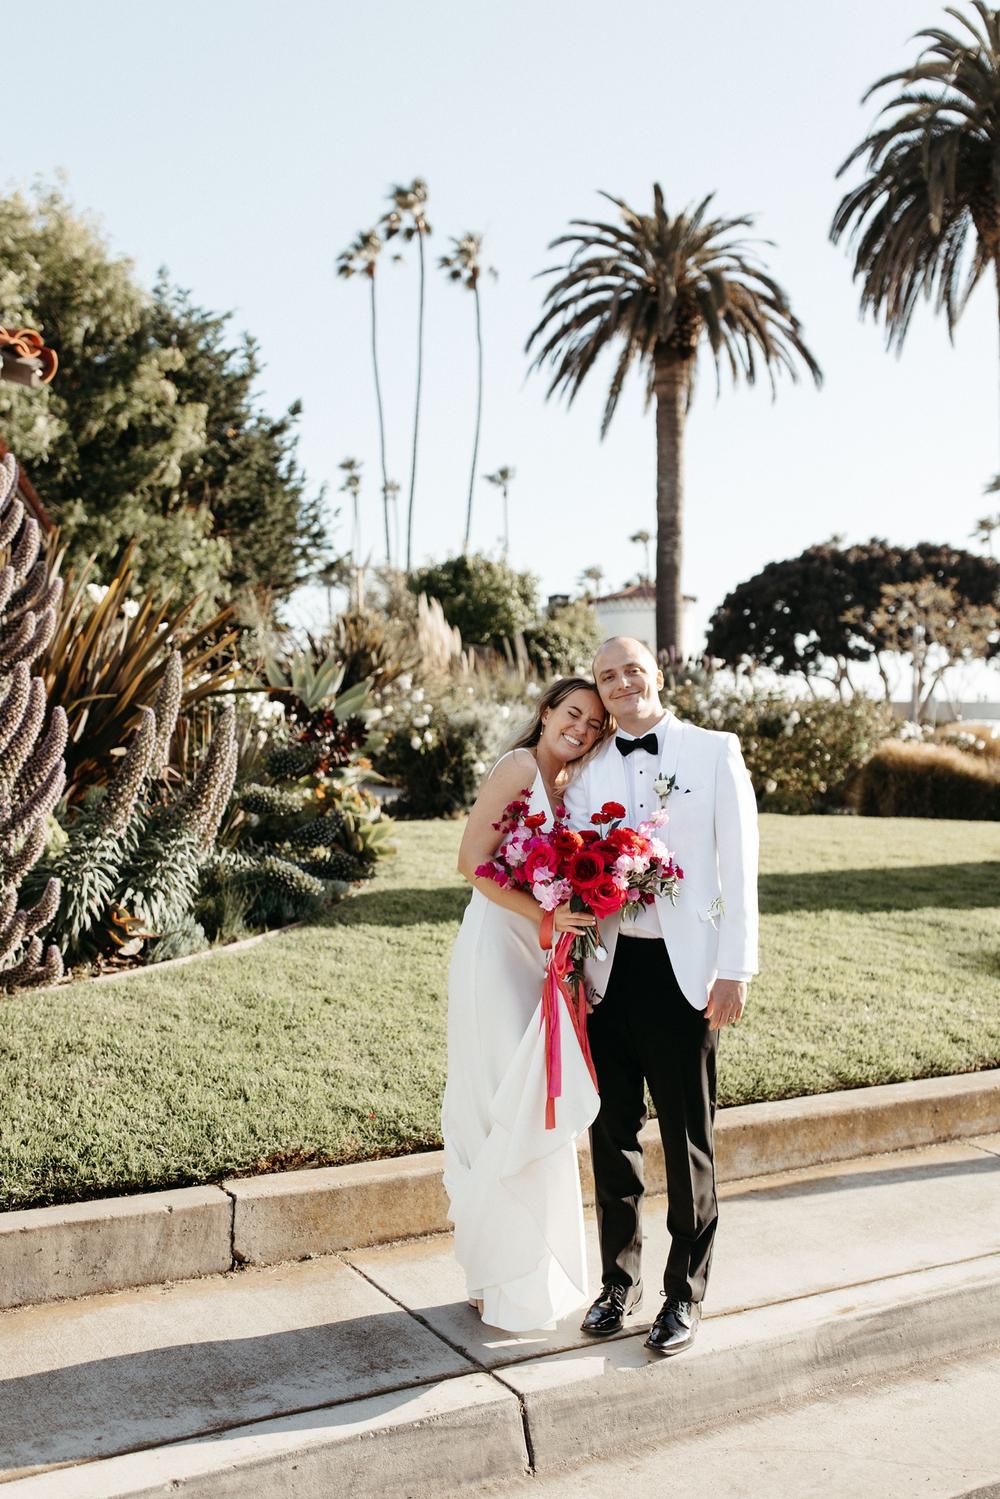 Neutral Chic Wedding at The Casino San Clemente